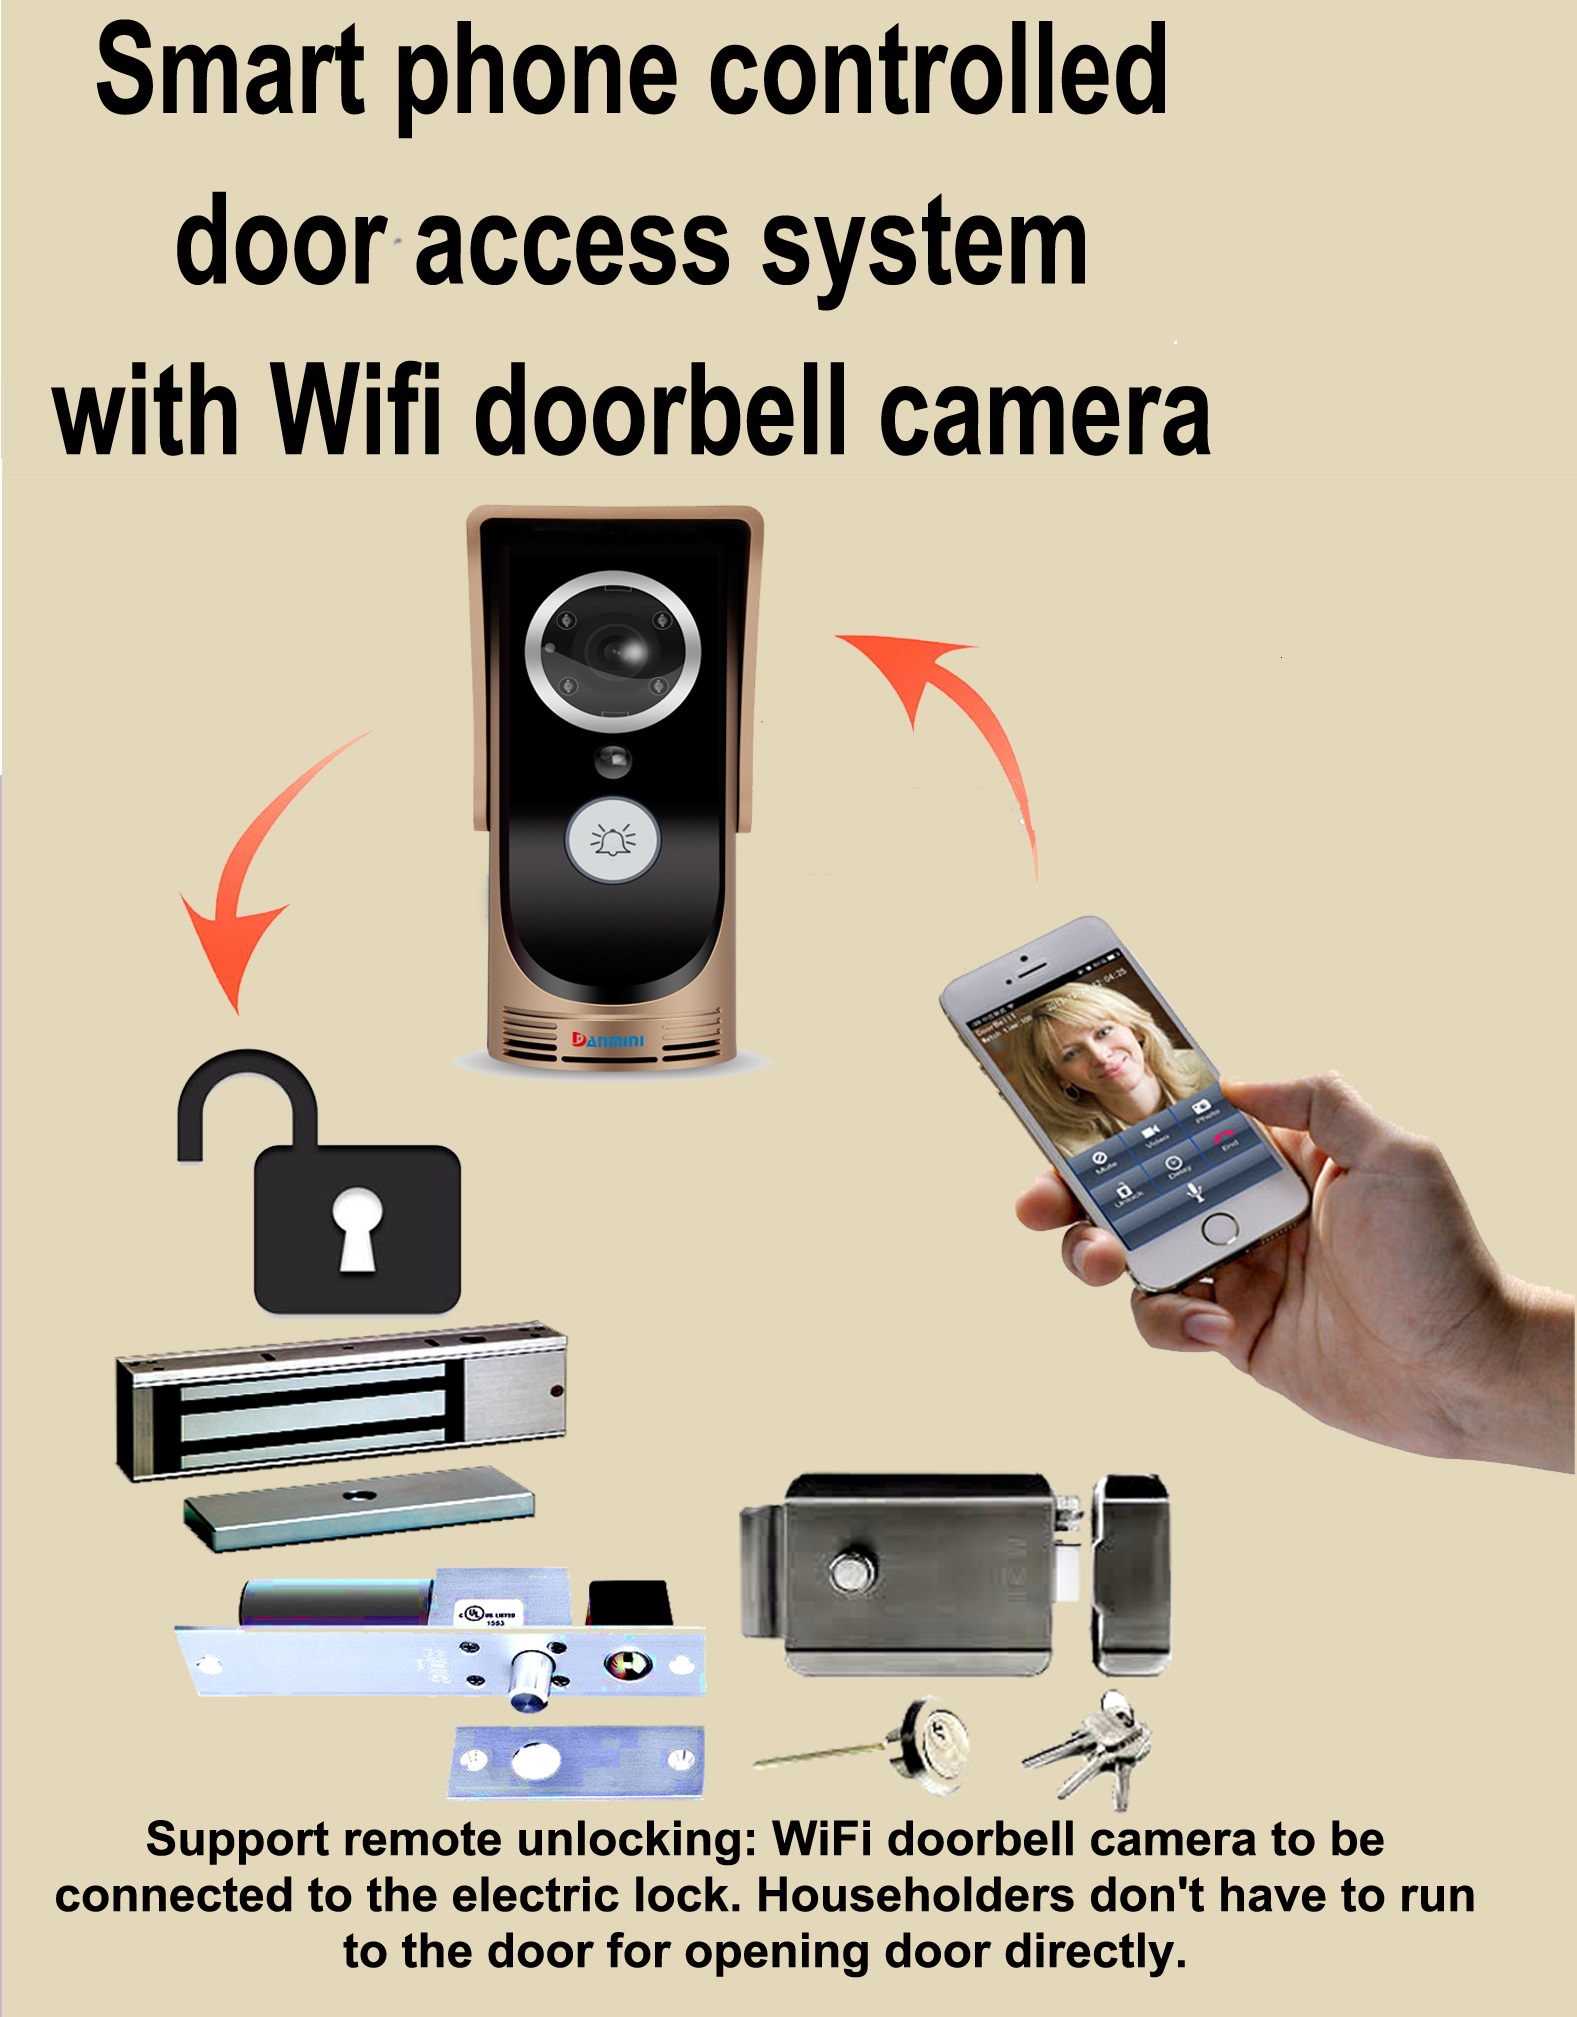 Mobile Access With Camera